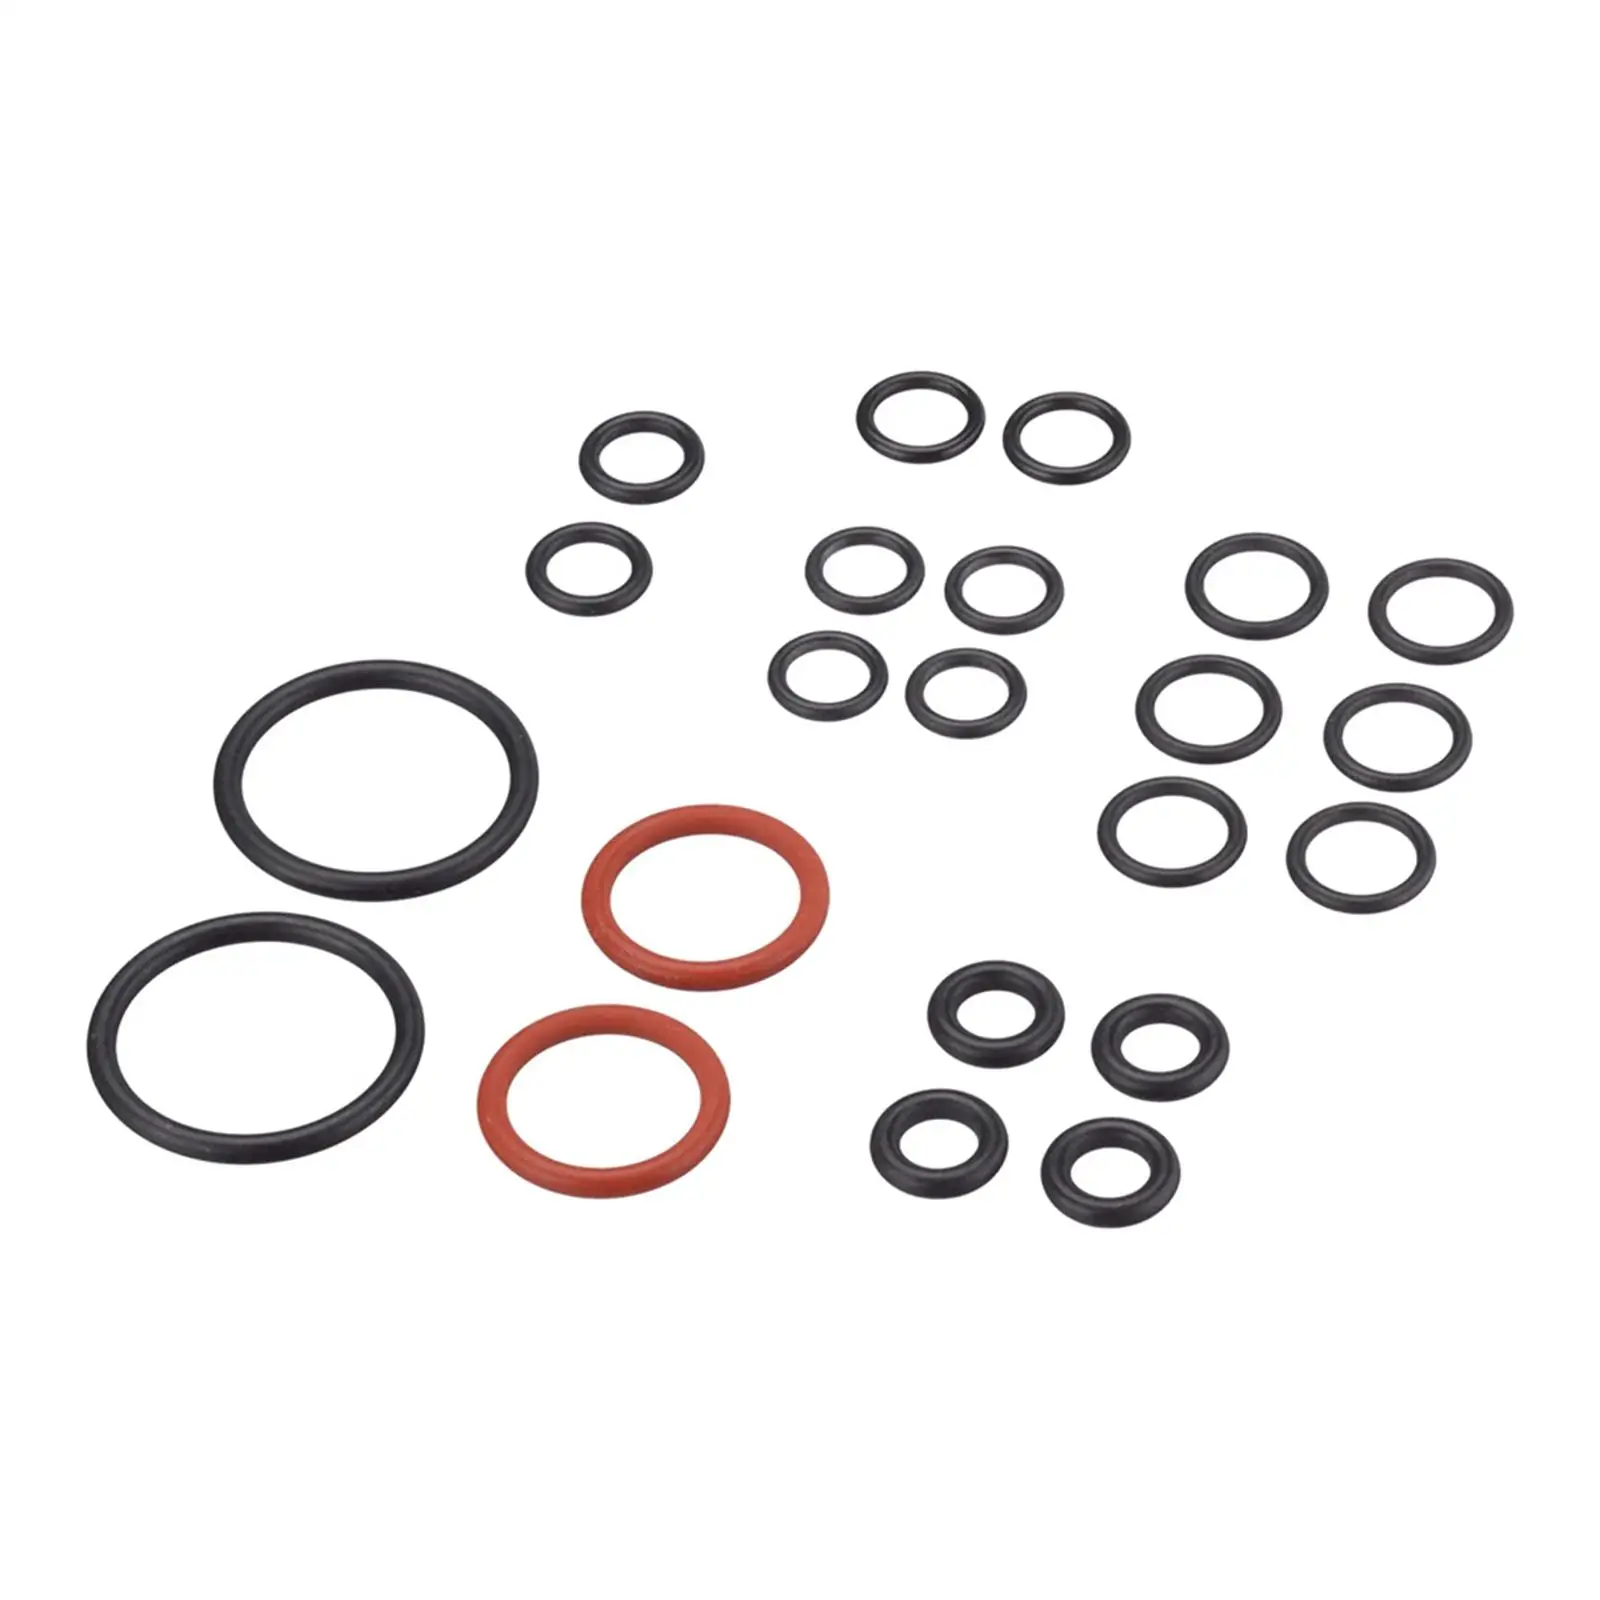 Rubber Sealing Rings Hose Nozzle Seals Gasket O Rings for Karcher Detailed Nozzles Extension Pipes Safety Valves